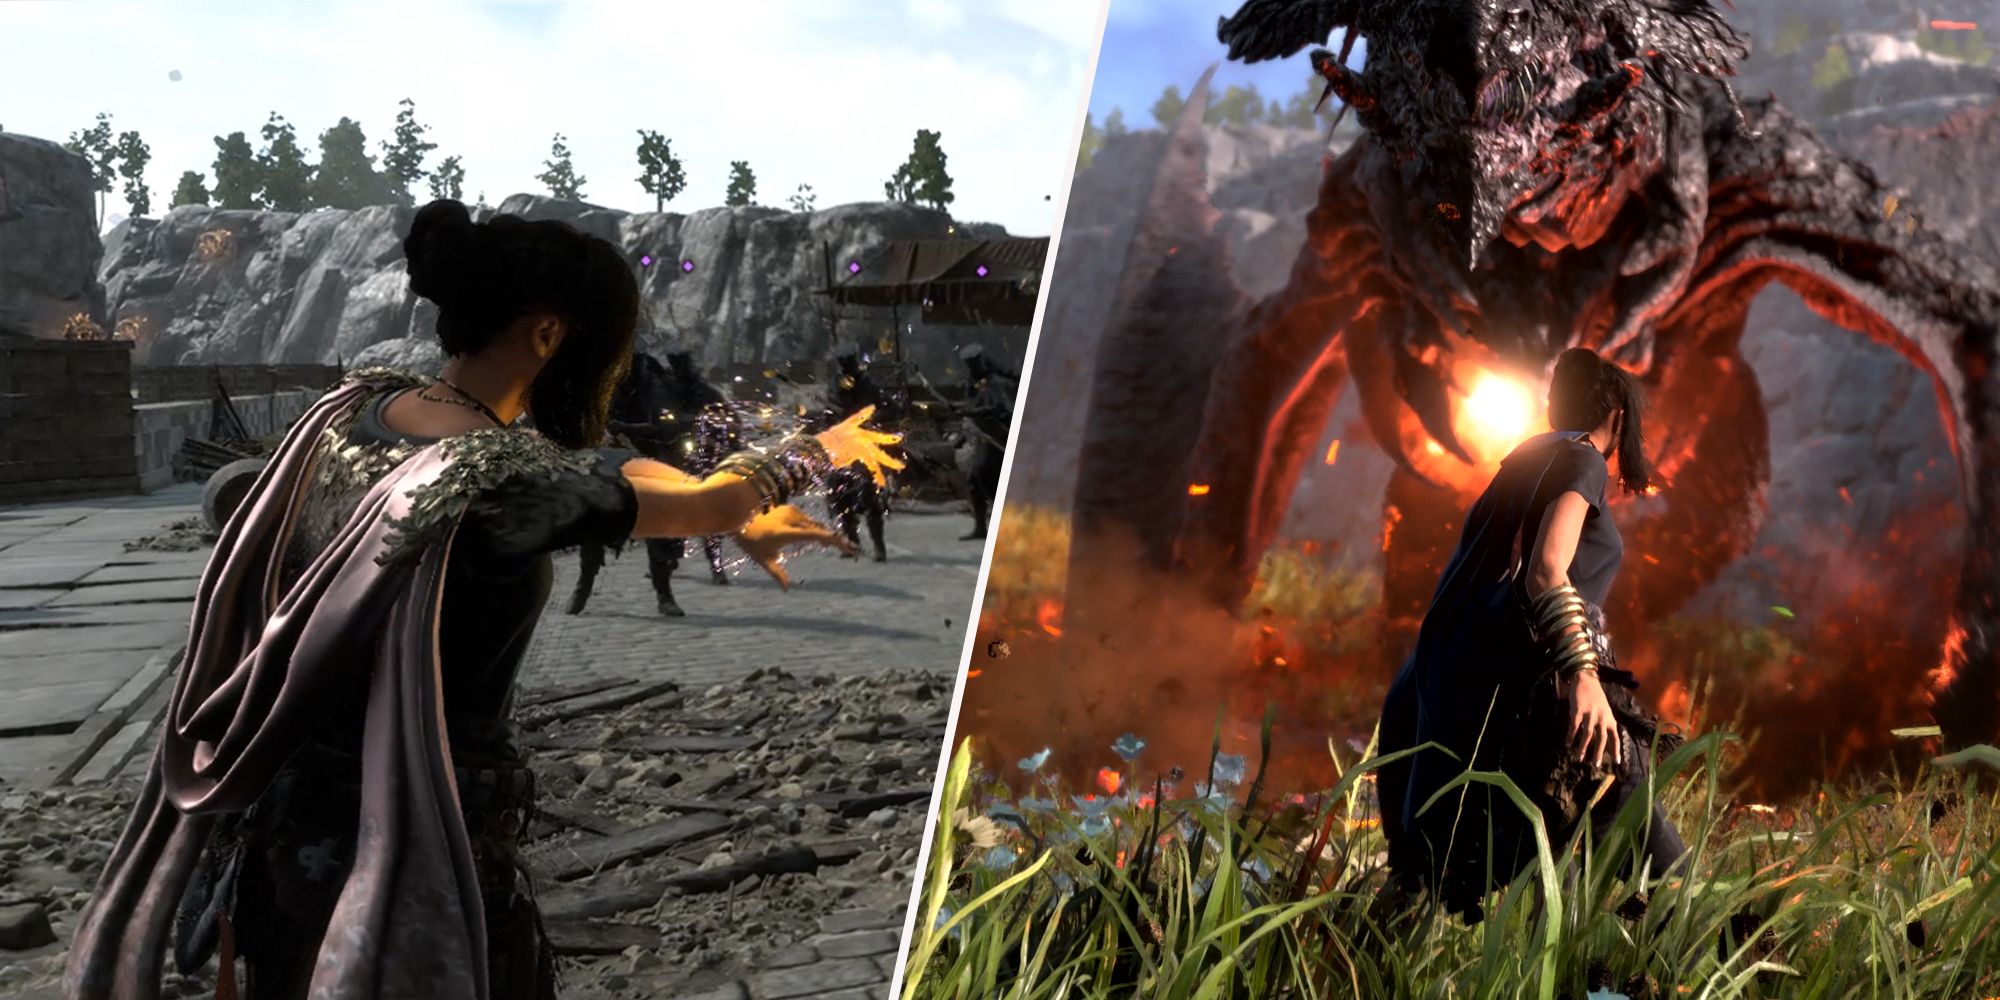 Split image. Frey fighting enemies with fire magic on the left photo. Frey facing a dragon on the right photo.